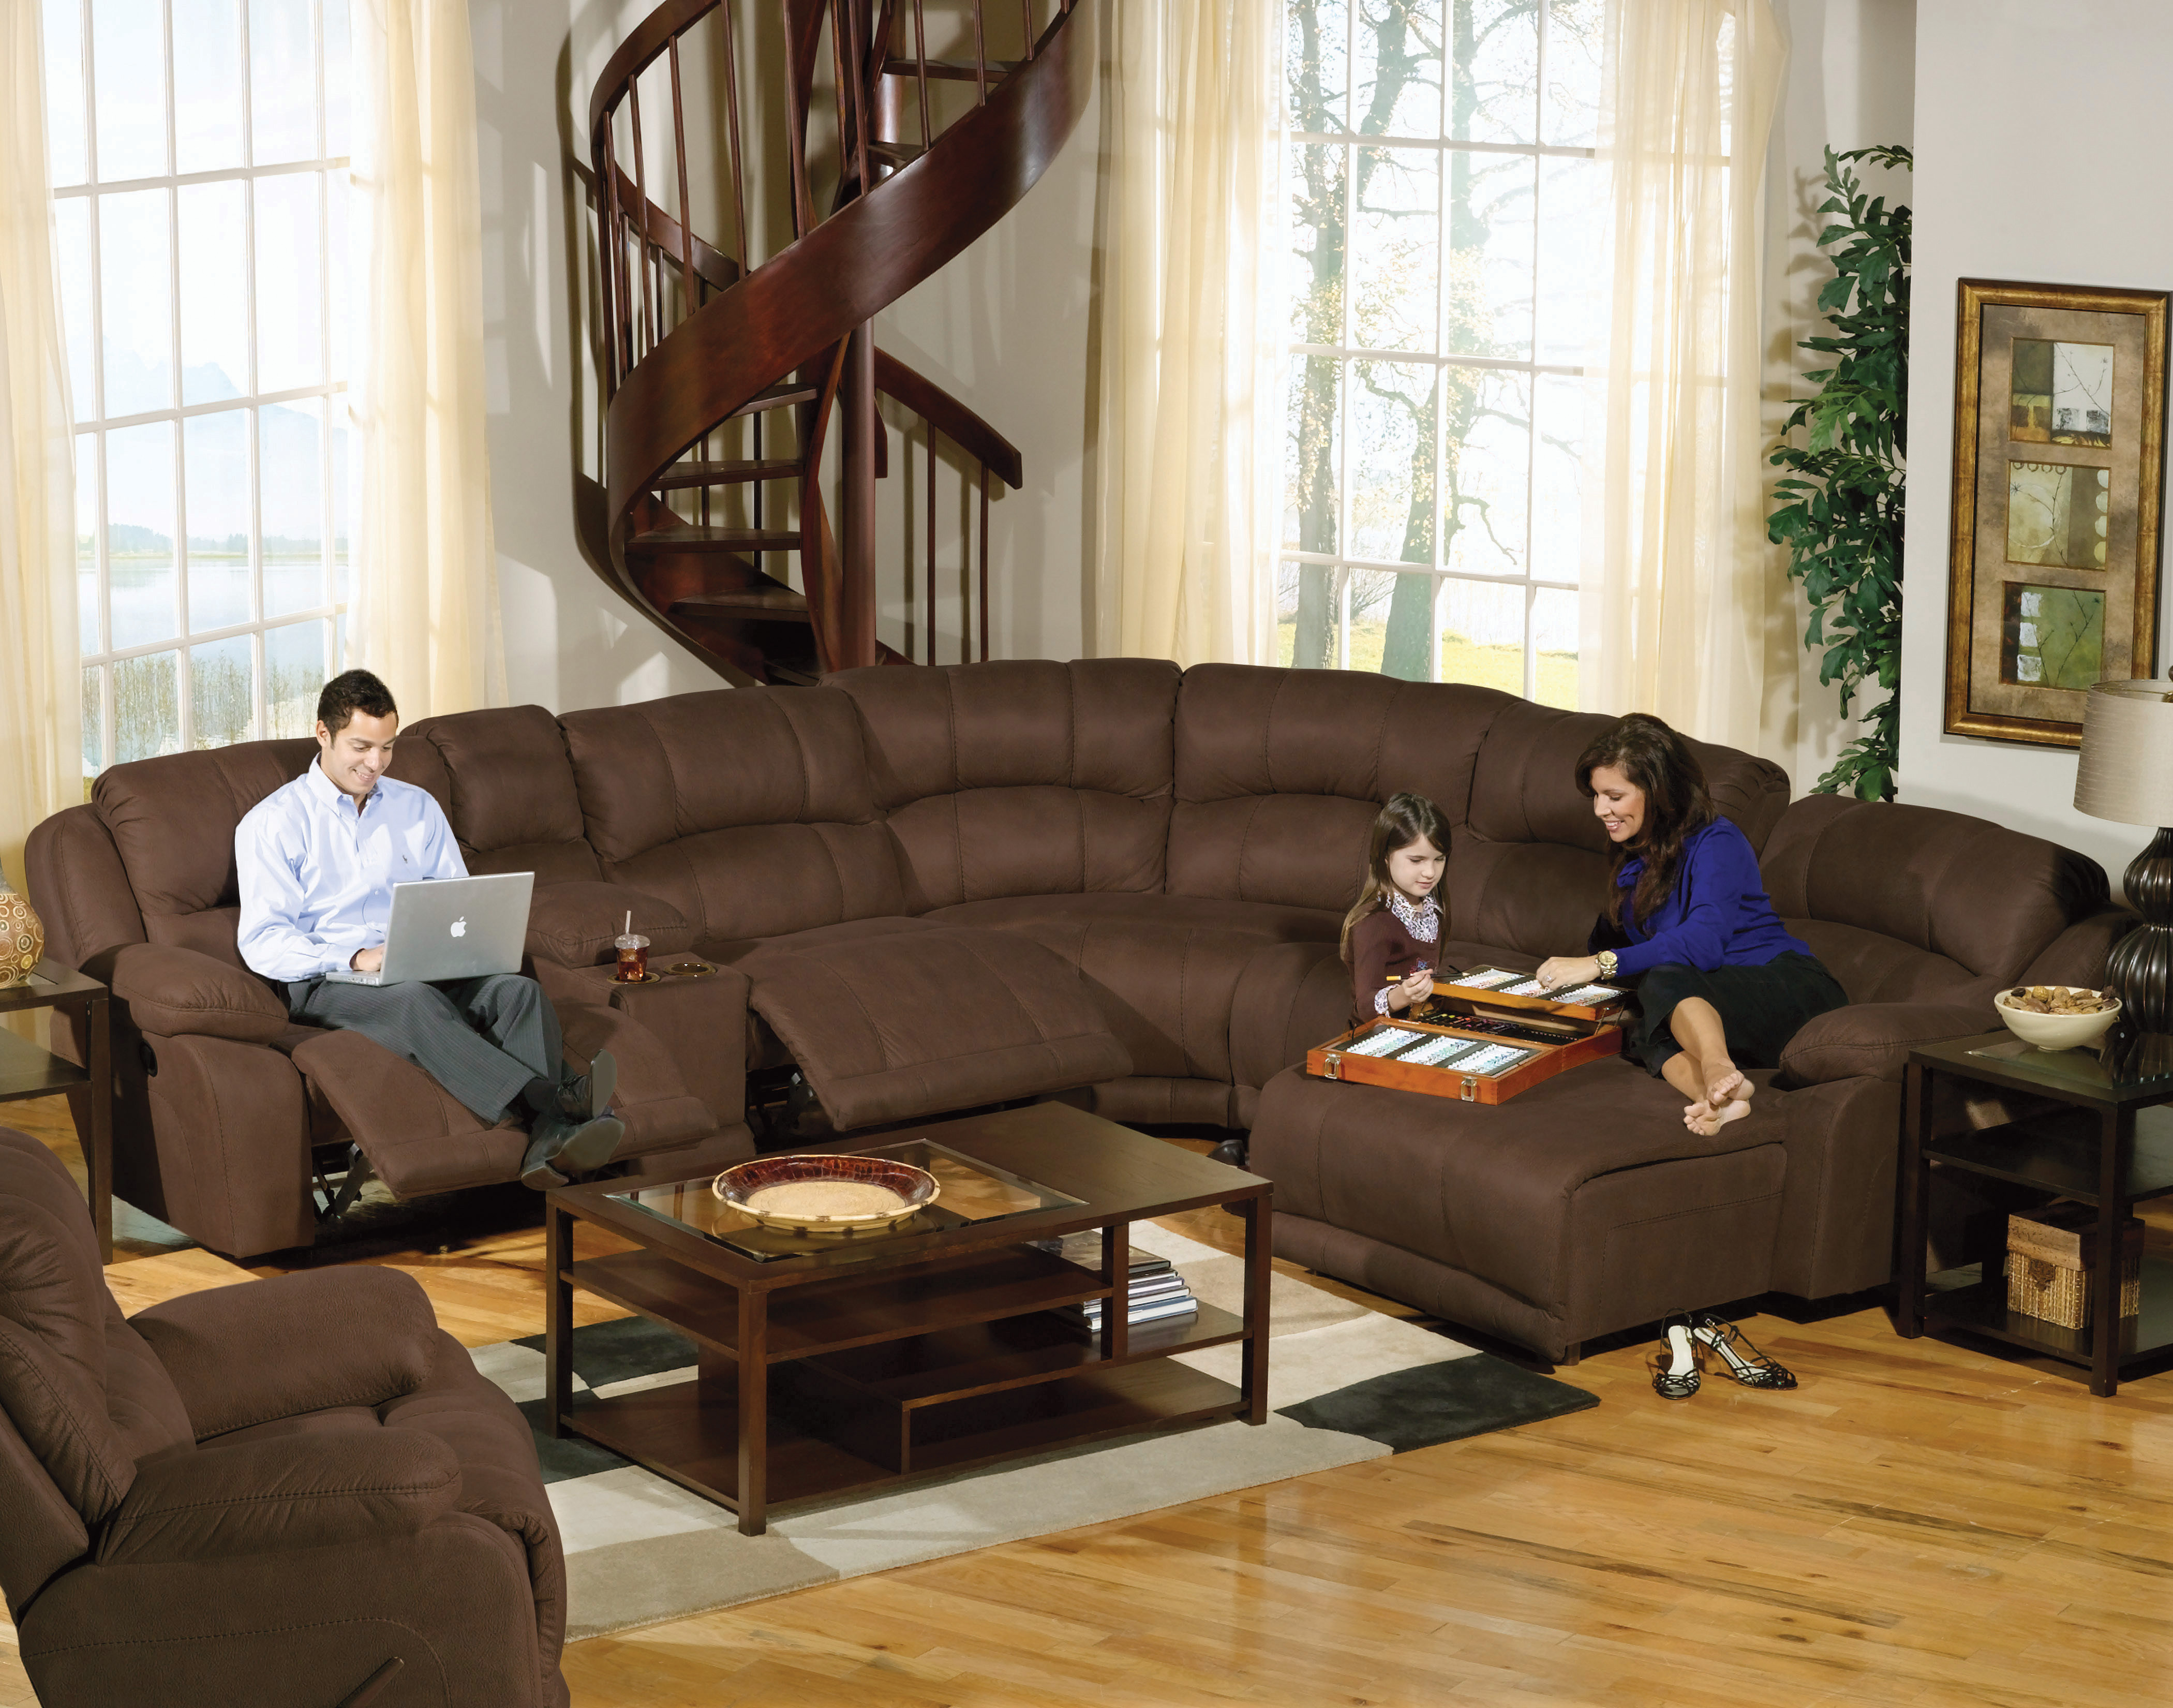 Elegant Charming Large Sectional Sofas With Recliners 74 About Remodel Slipcovers  For Sectional large sectional sofas with recliners